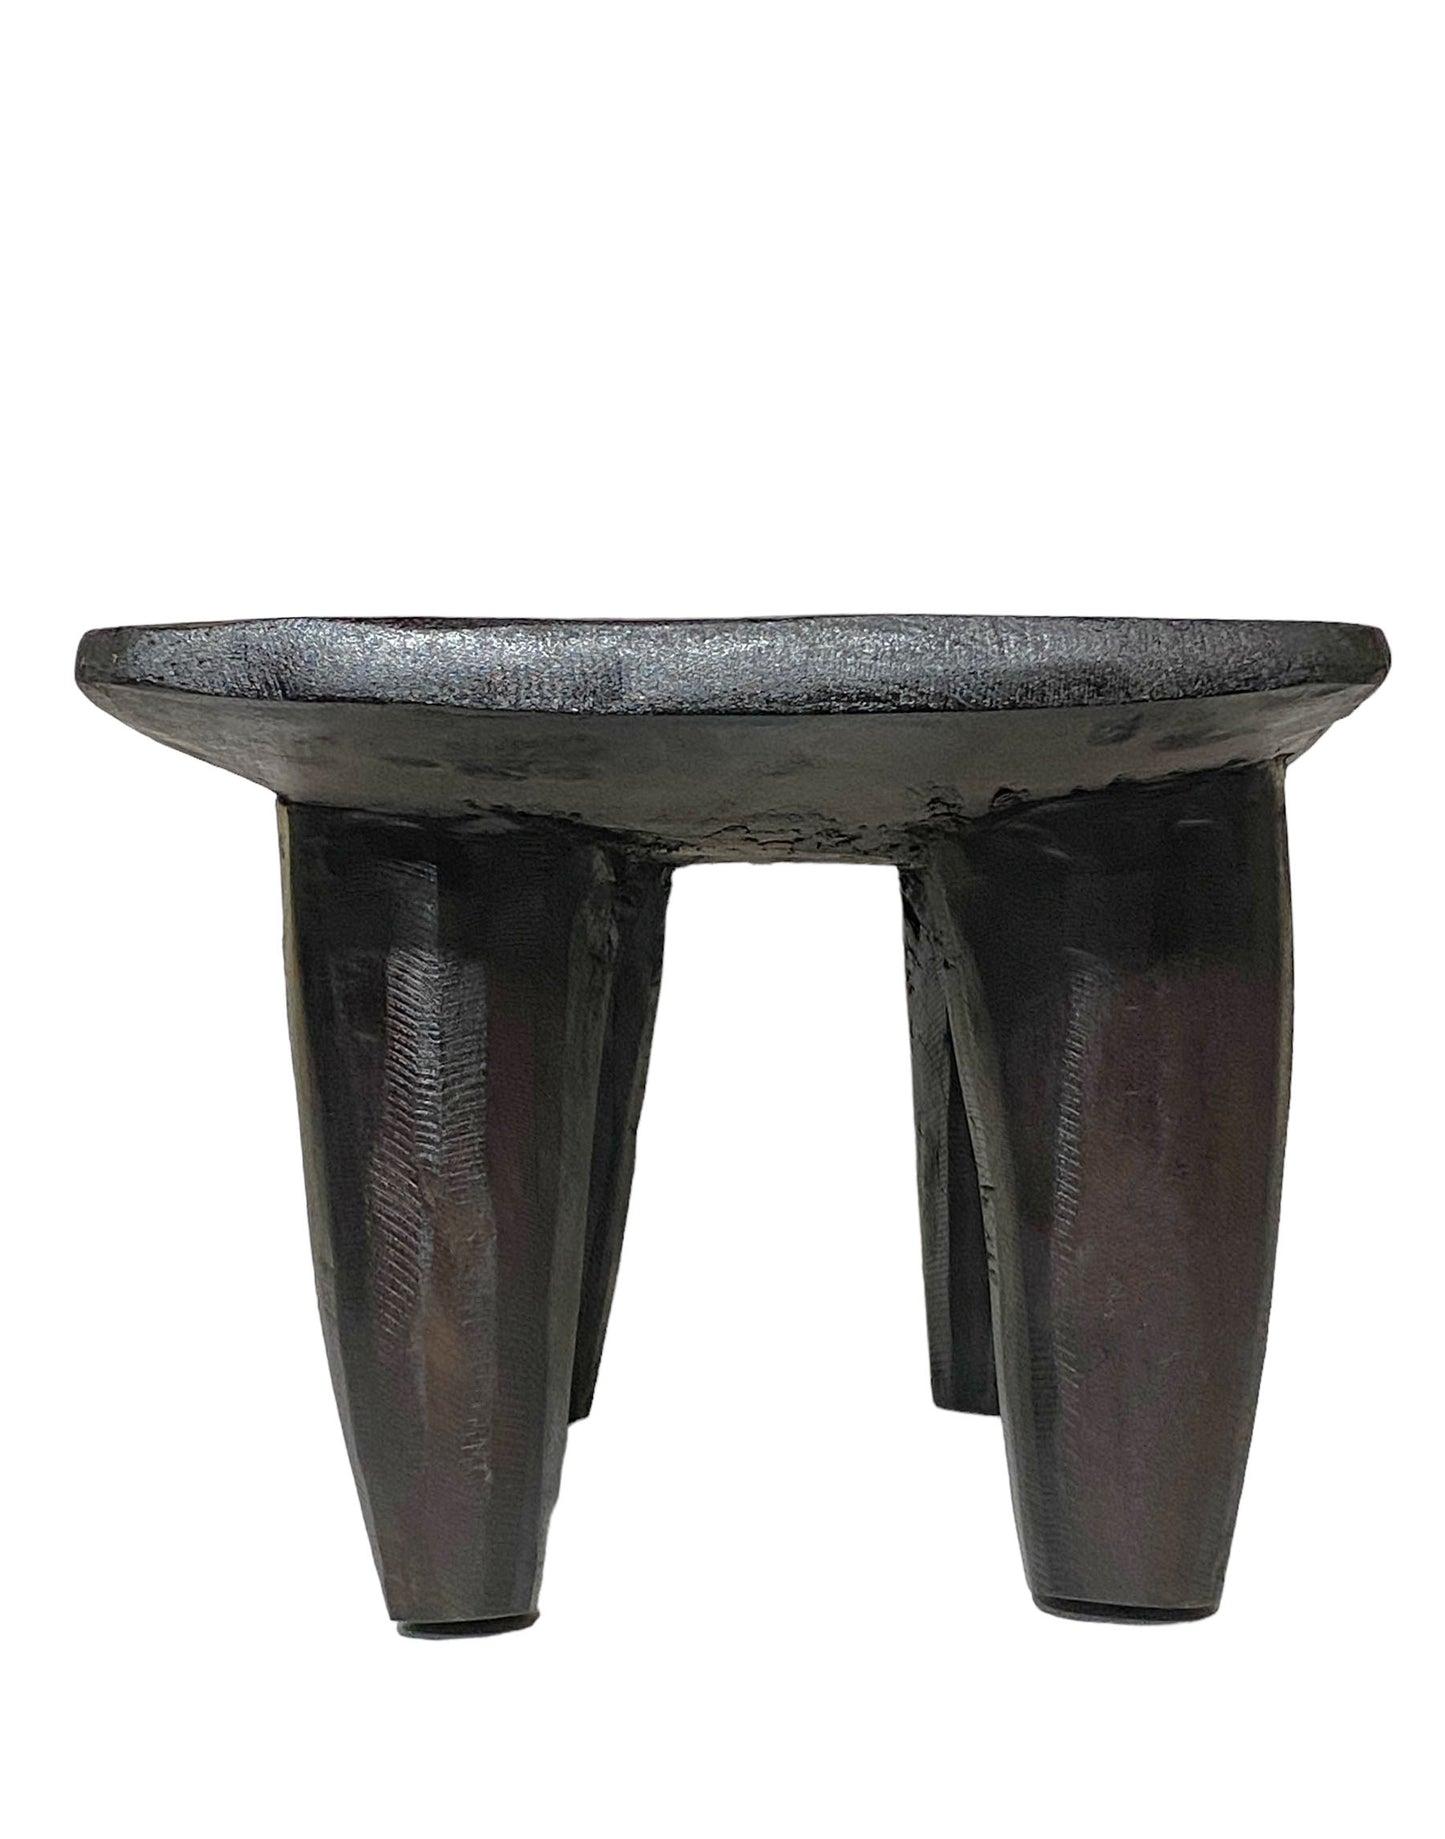 # 5910 African Carved Wood Senufo Table/Stool 22" W